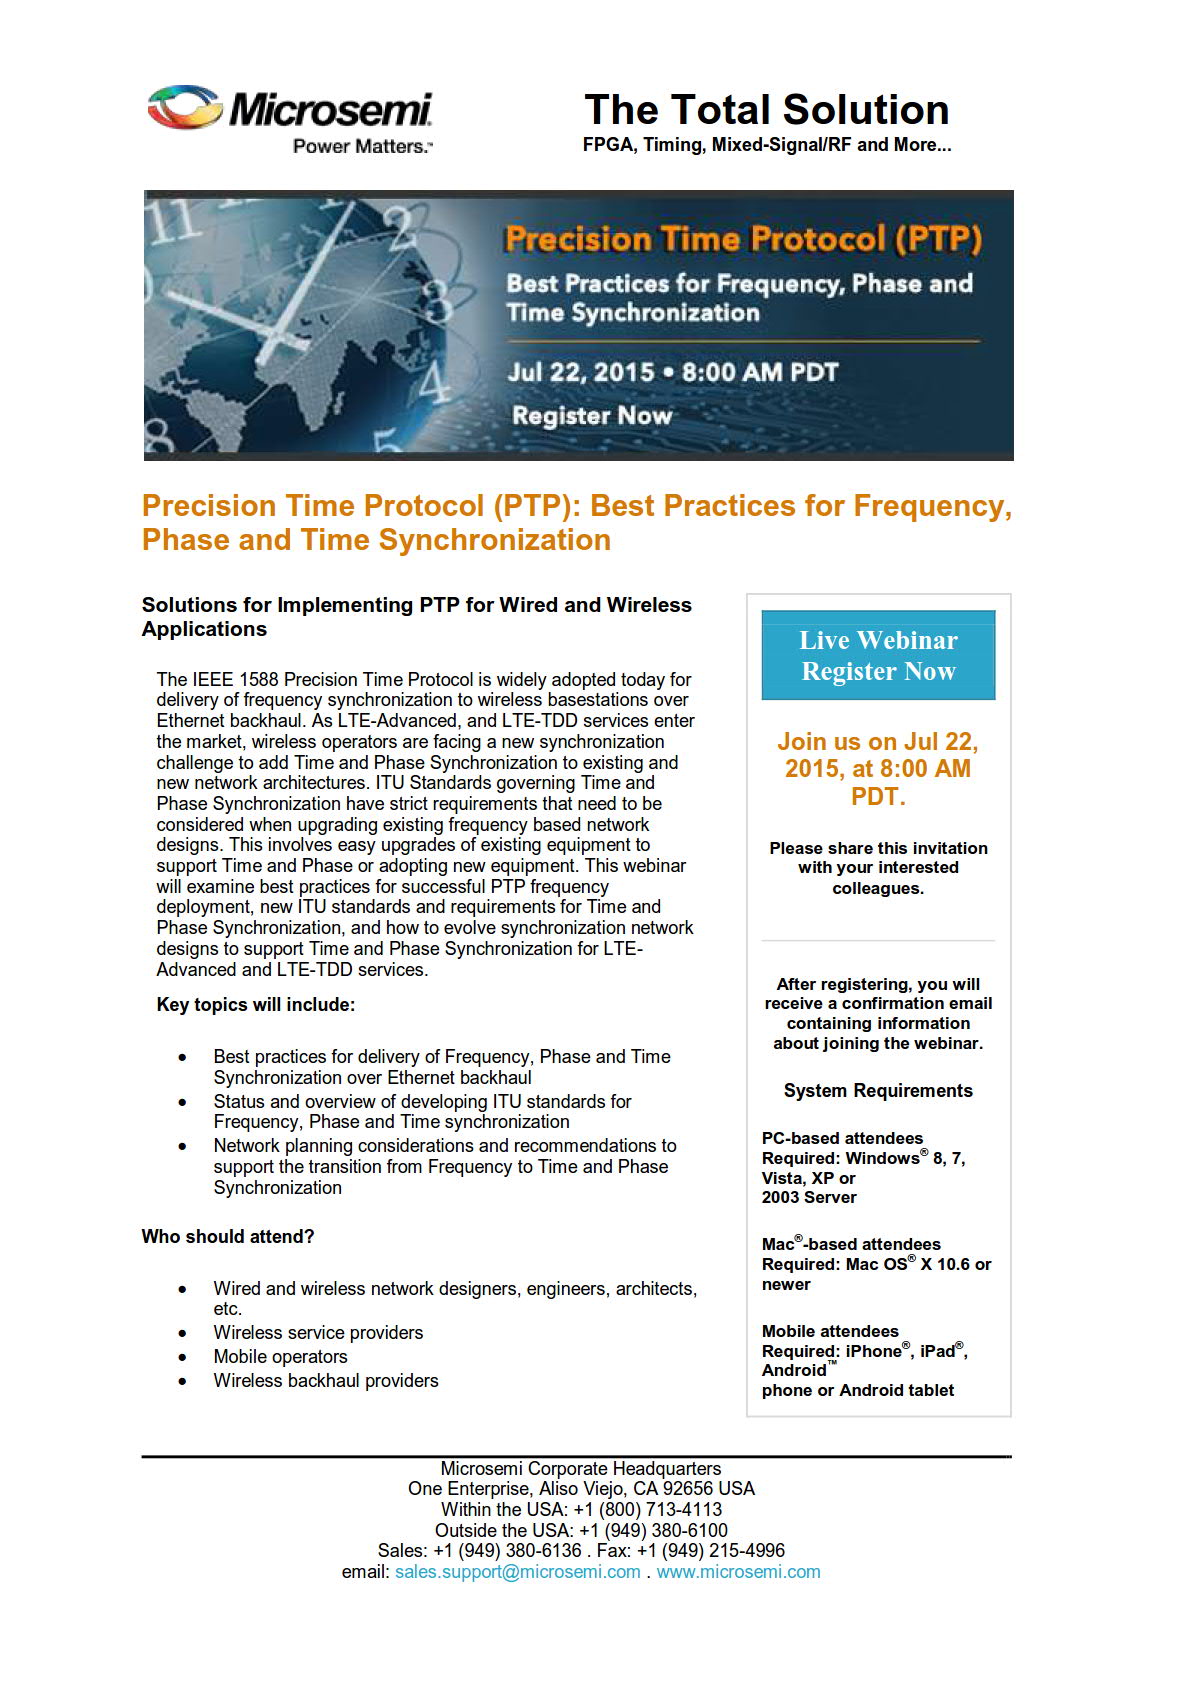 Invitation to Precision Time Protocol (PTP): Best Practices for Frequency, Phase and Time Synchronization, Phase and Time Synchronization